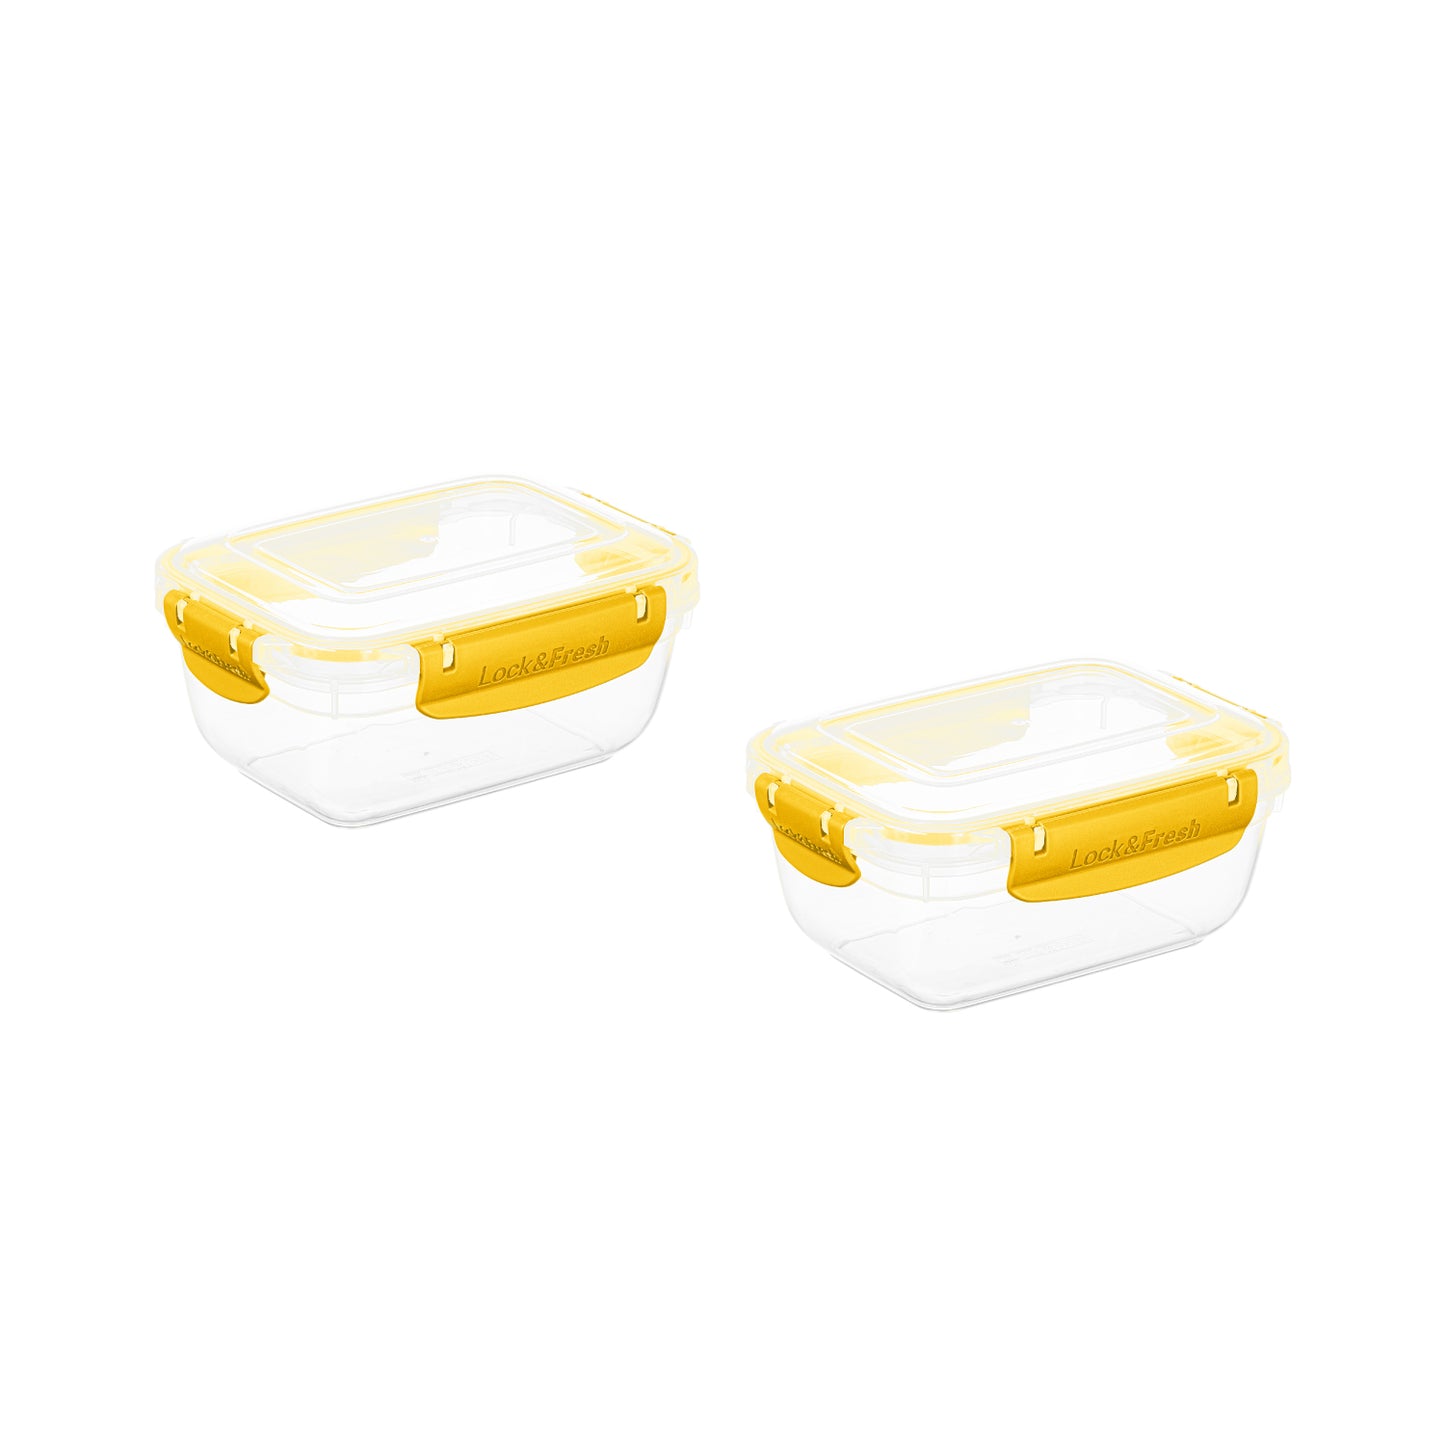 27 oz. Sealed Container, 2 Pack